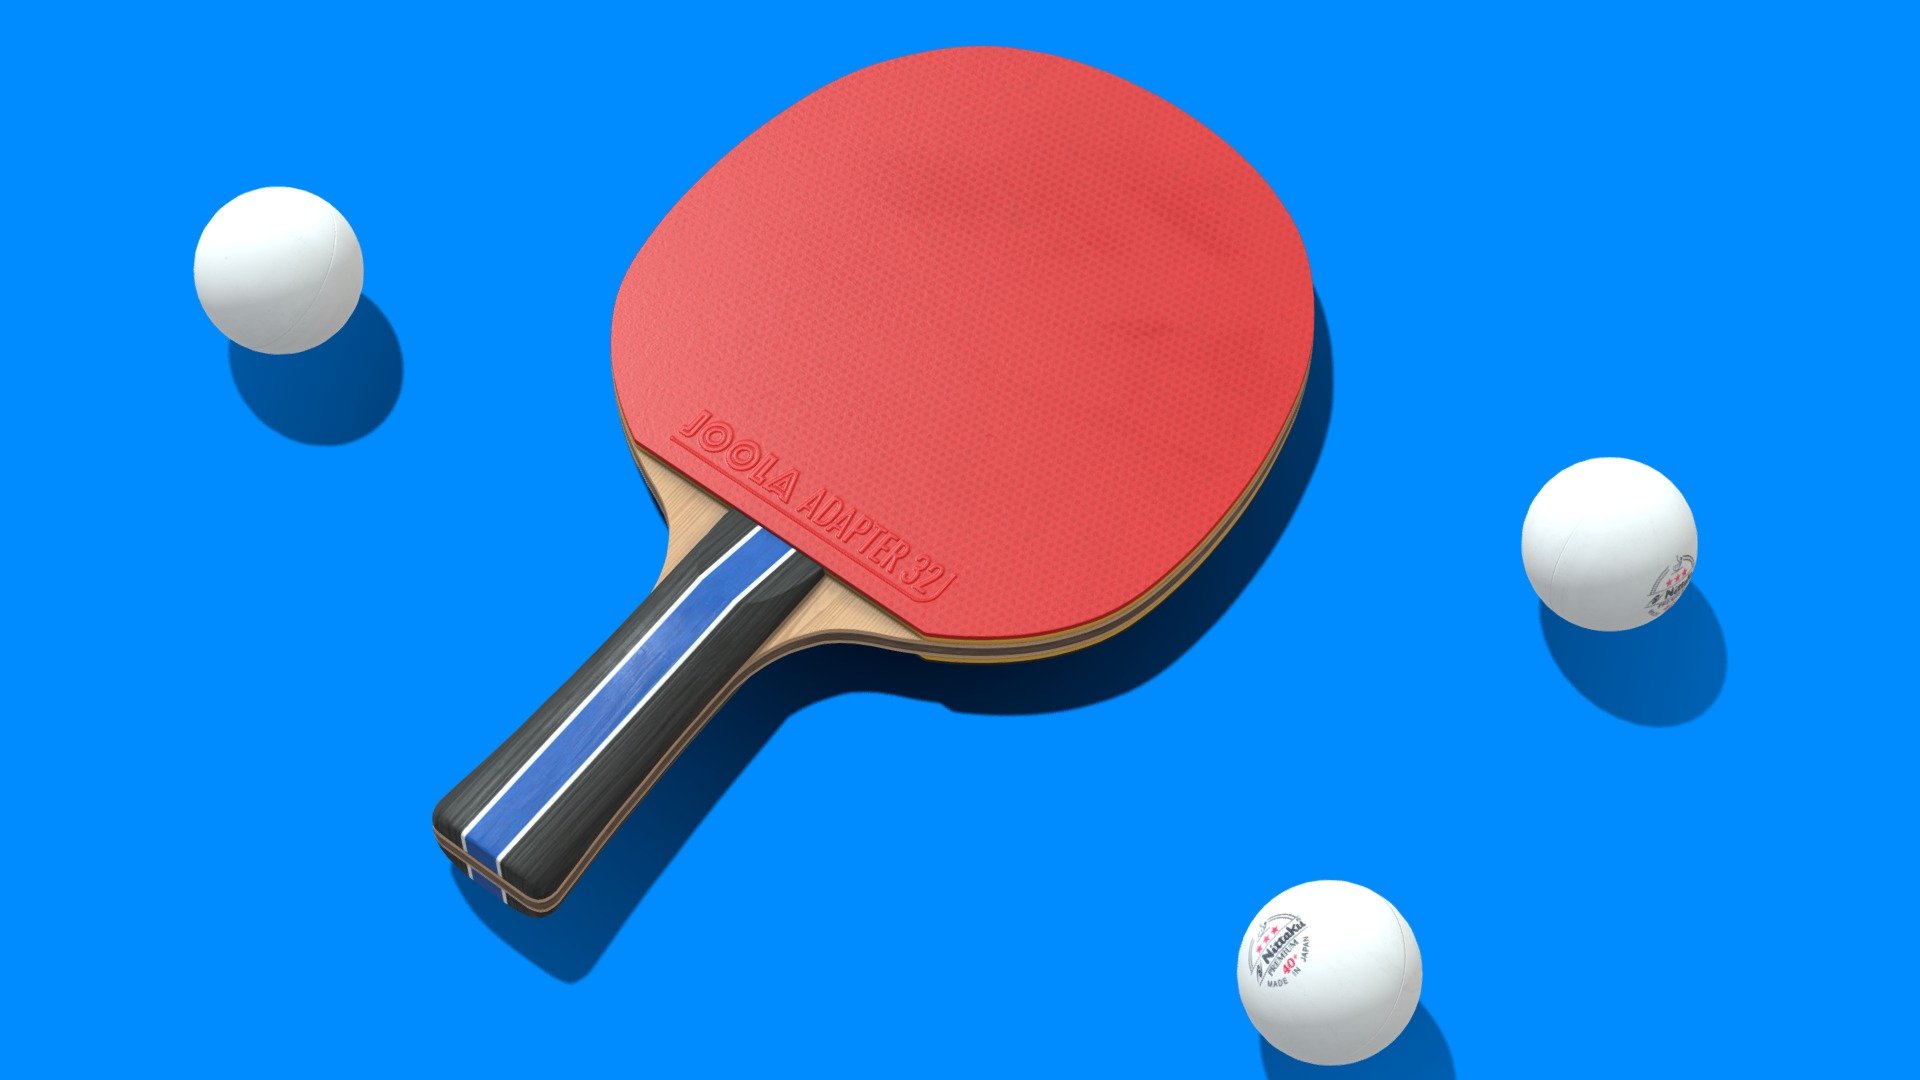 The after school ping pong club - pick up a paddle and start playing! Modeled in Maya, textured in Substance Painter :) - Ping Pong Paddle and Ball - 3D model by shrednector 3d model